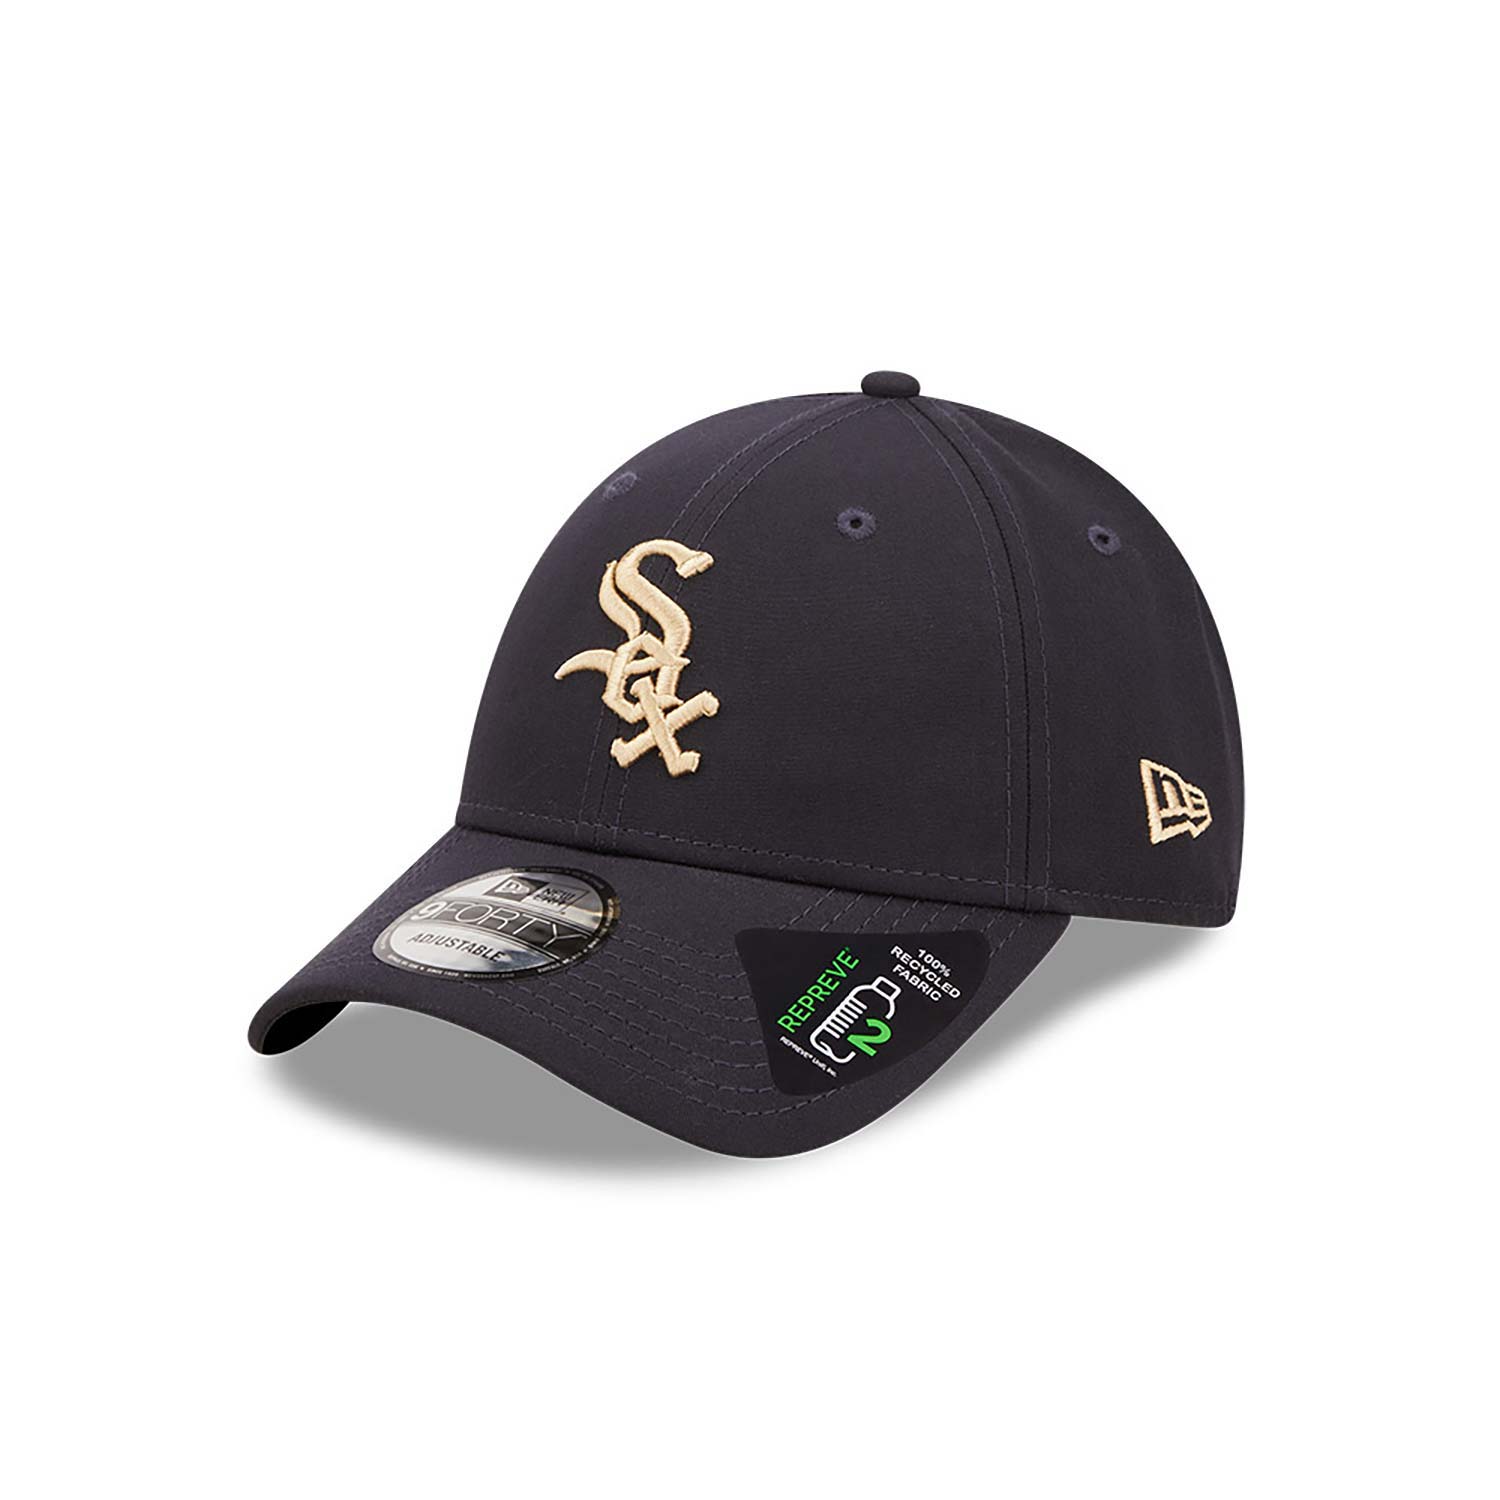 Official New Era Repreve® Chicago White Sox Navy 9FORTY Cap B9135_447  B9135_447